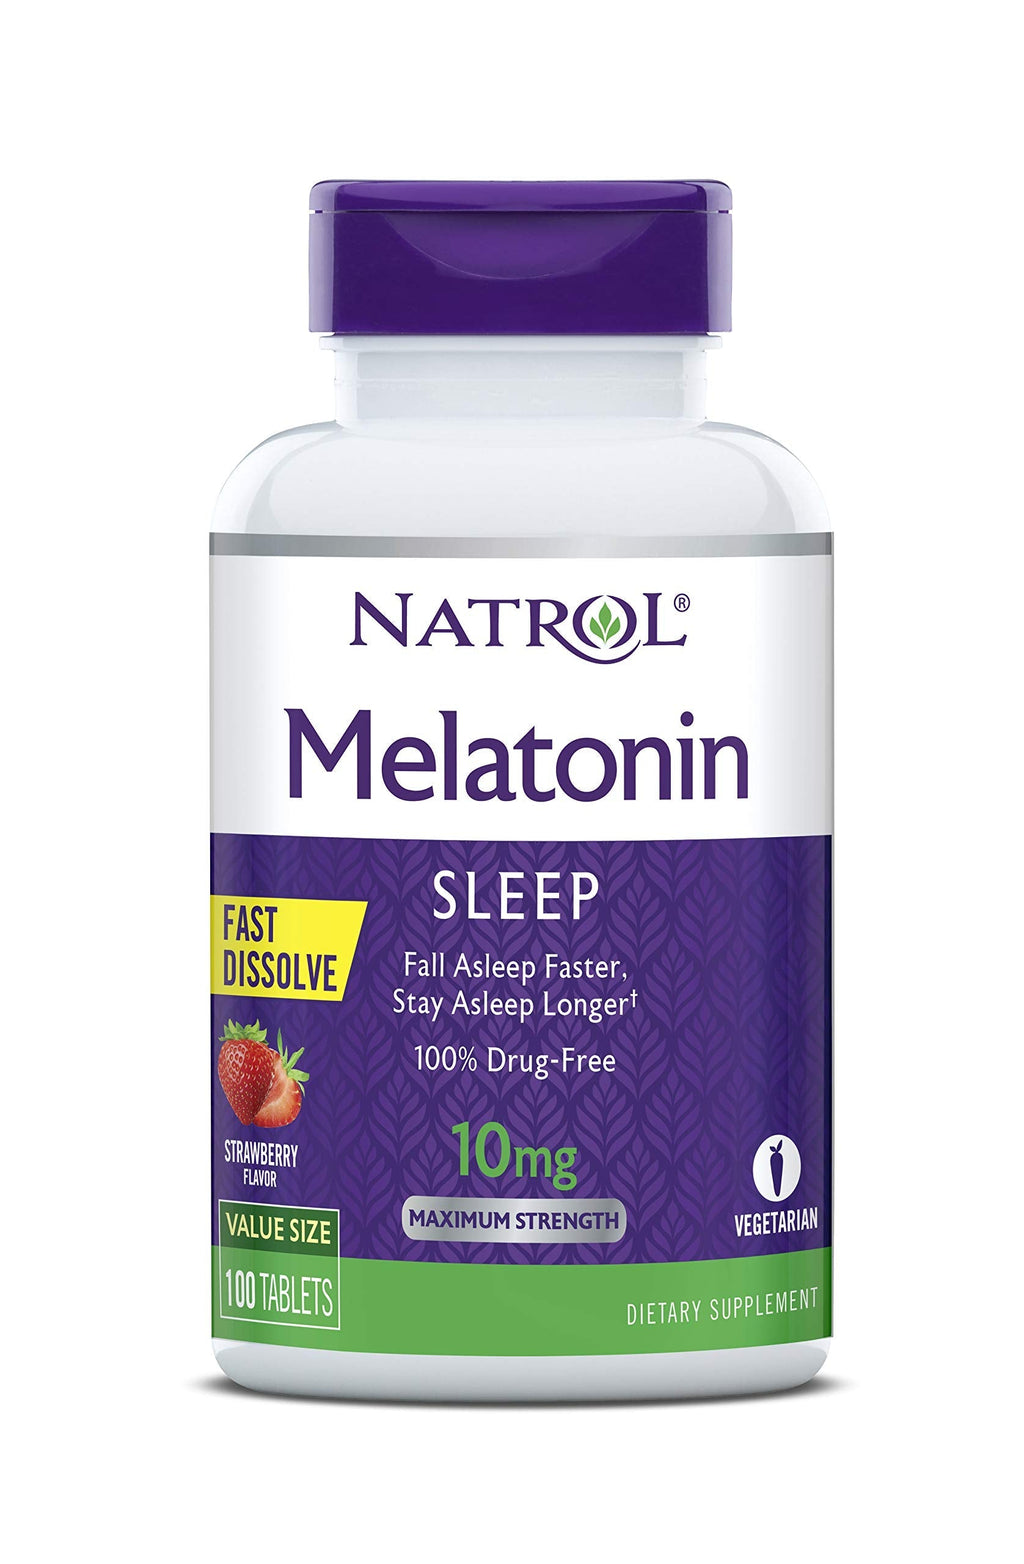 [Australia] - Natrol Melatonin Fast Dissolve Tablets, Helps You Fall Asleep Faster, Stay Asleep Longer, Easy to Take, Dissolve in Mouth, Strengthen Immune System, Maximum Strength, Strawberry Flavor, 10mg, 100Count 100 